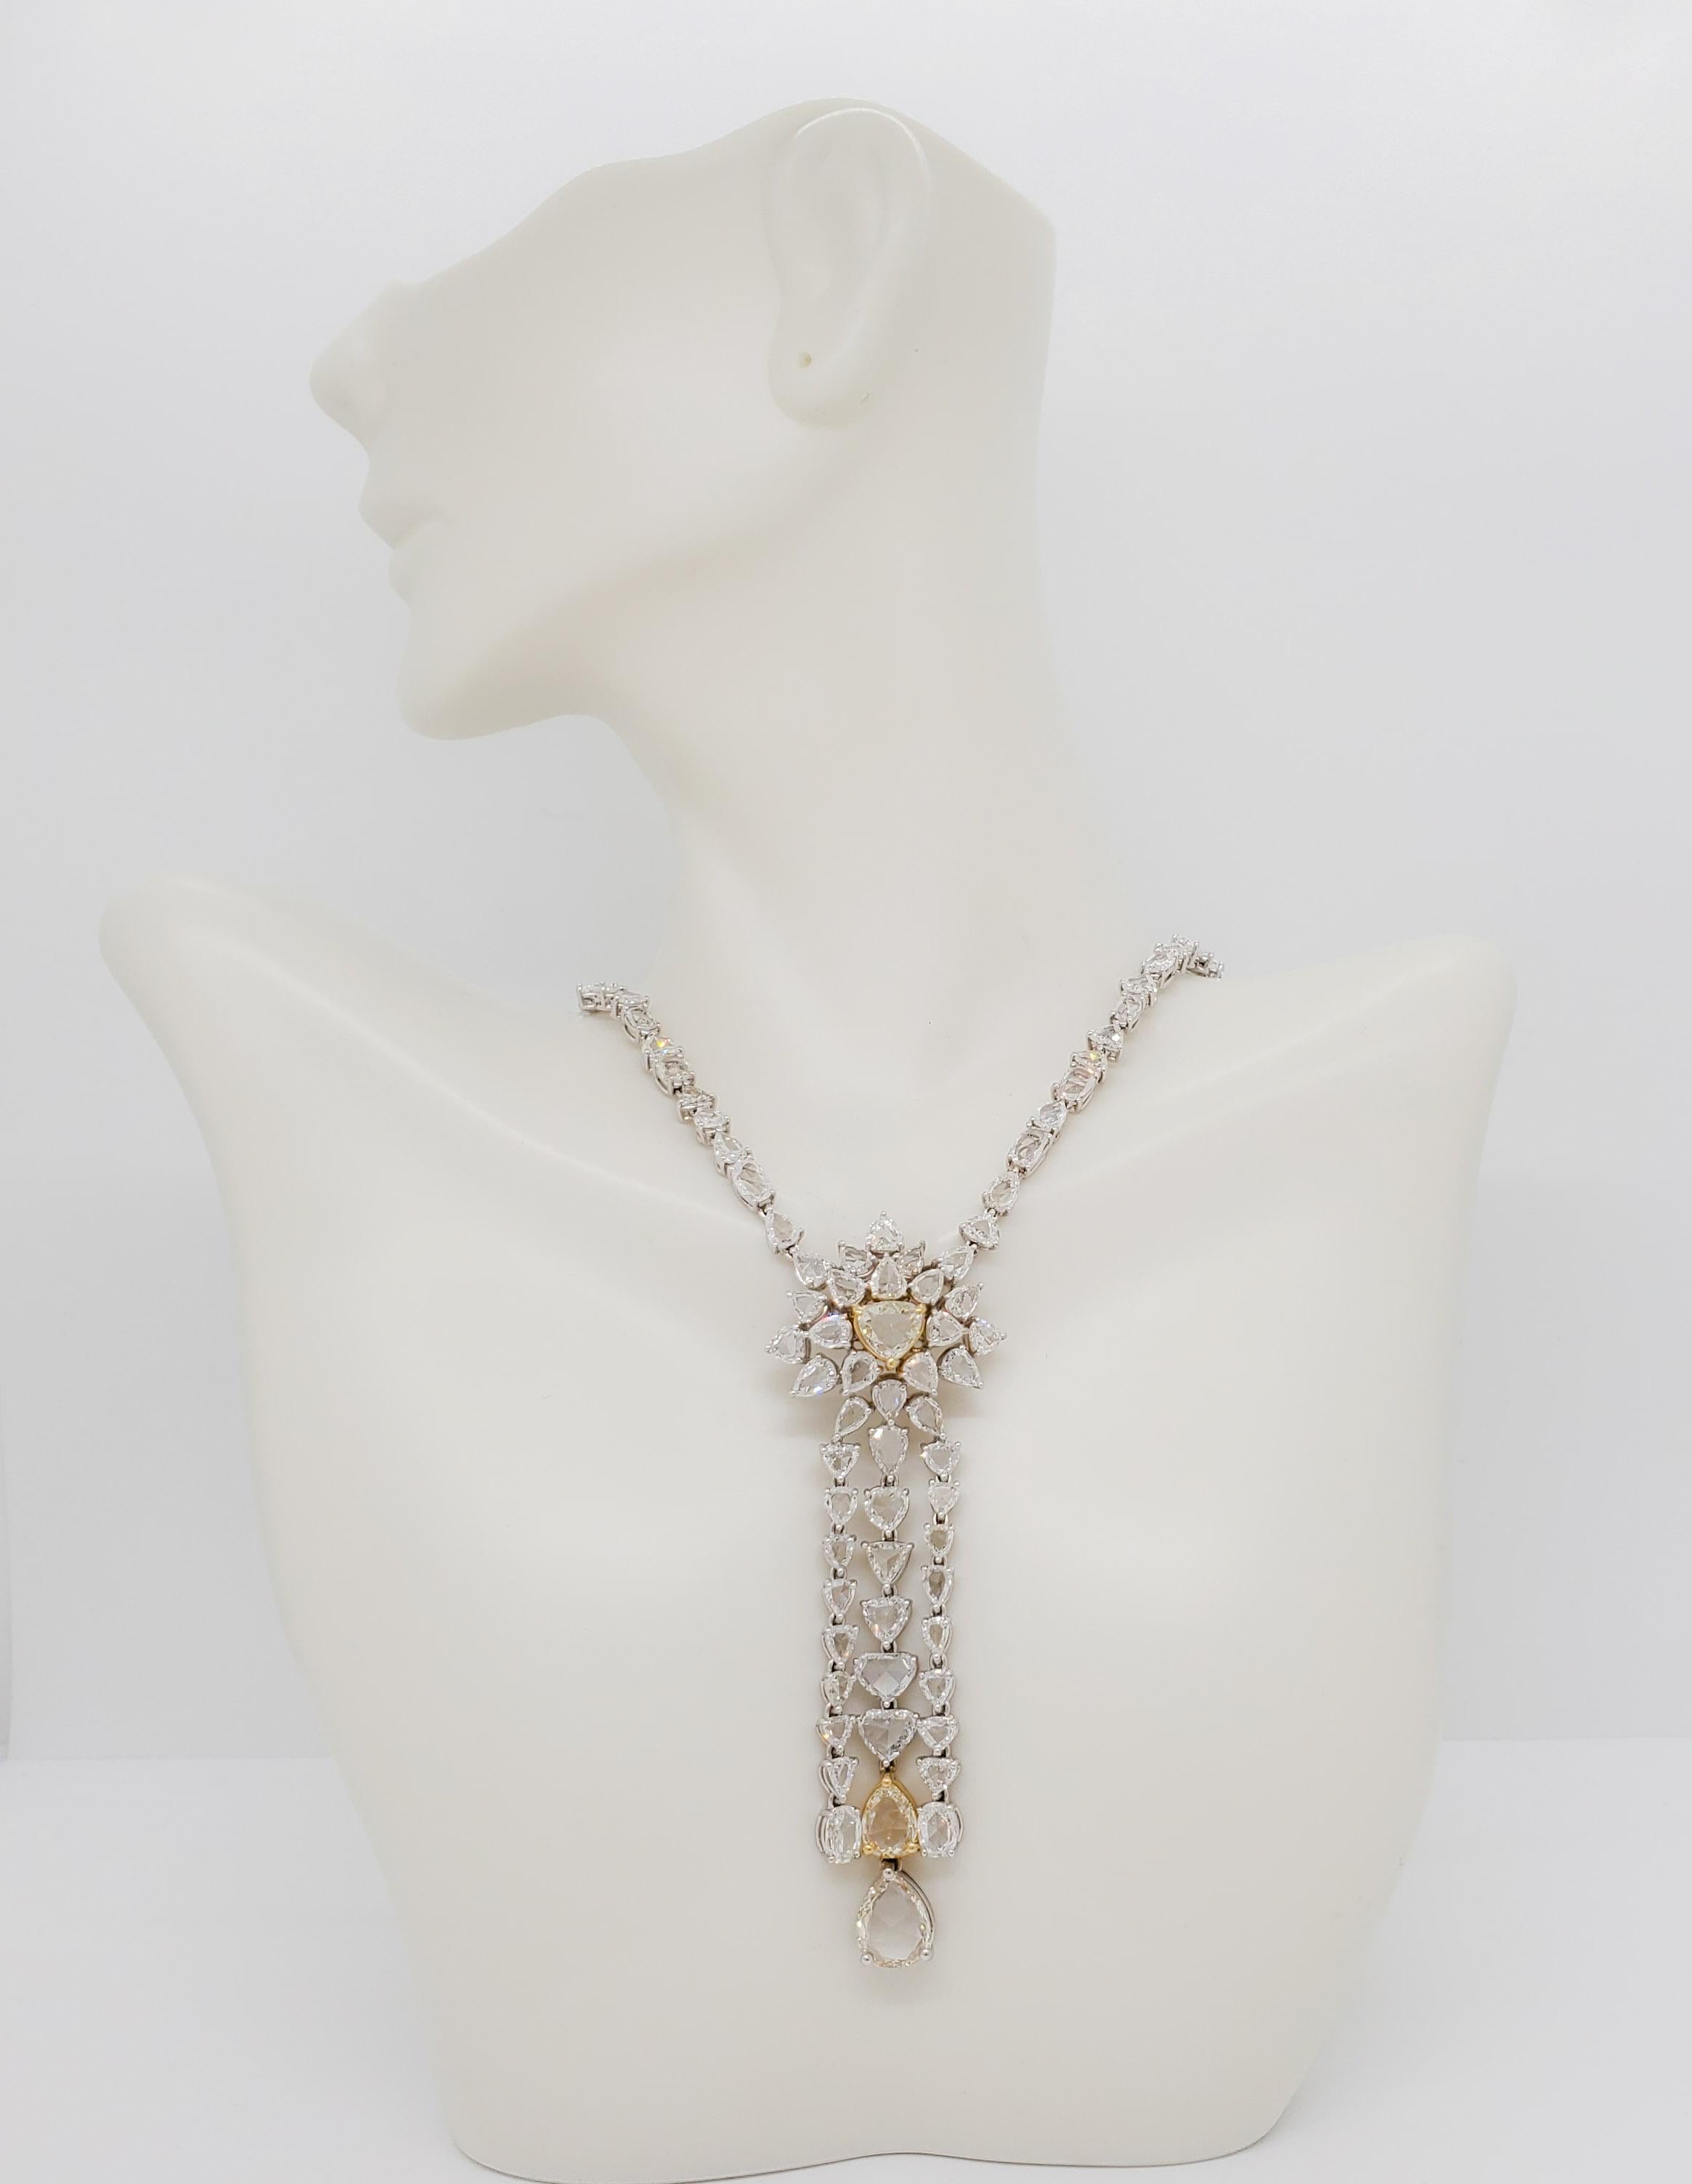 Absolutely stunning set with 40.20 ct (total of 151 stones) of white and yellow diamond rose cuts.  Handmade in 18k yellow and white gold.  